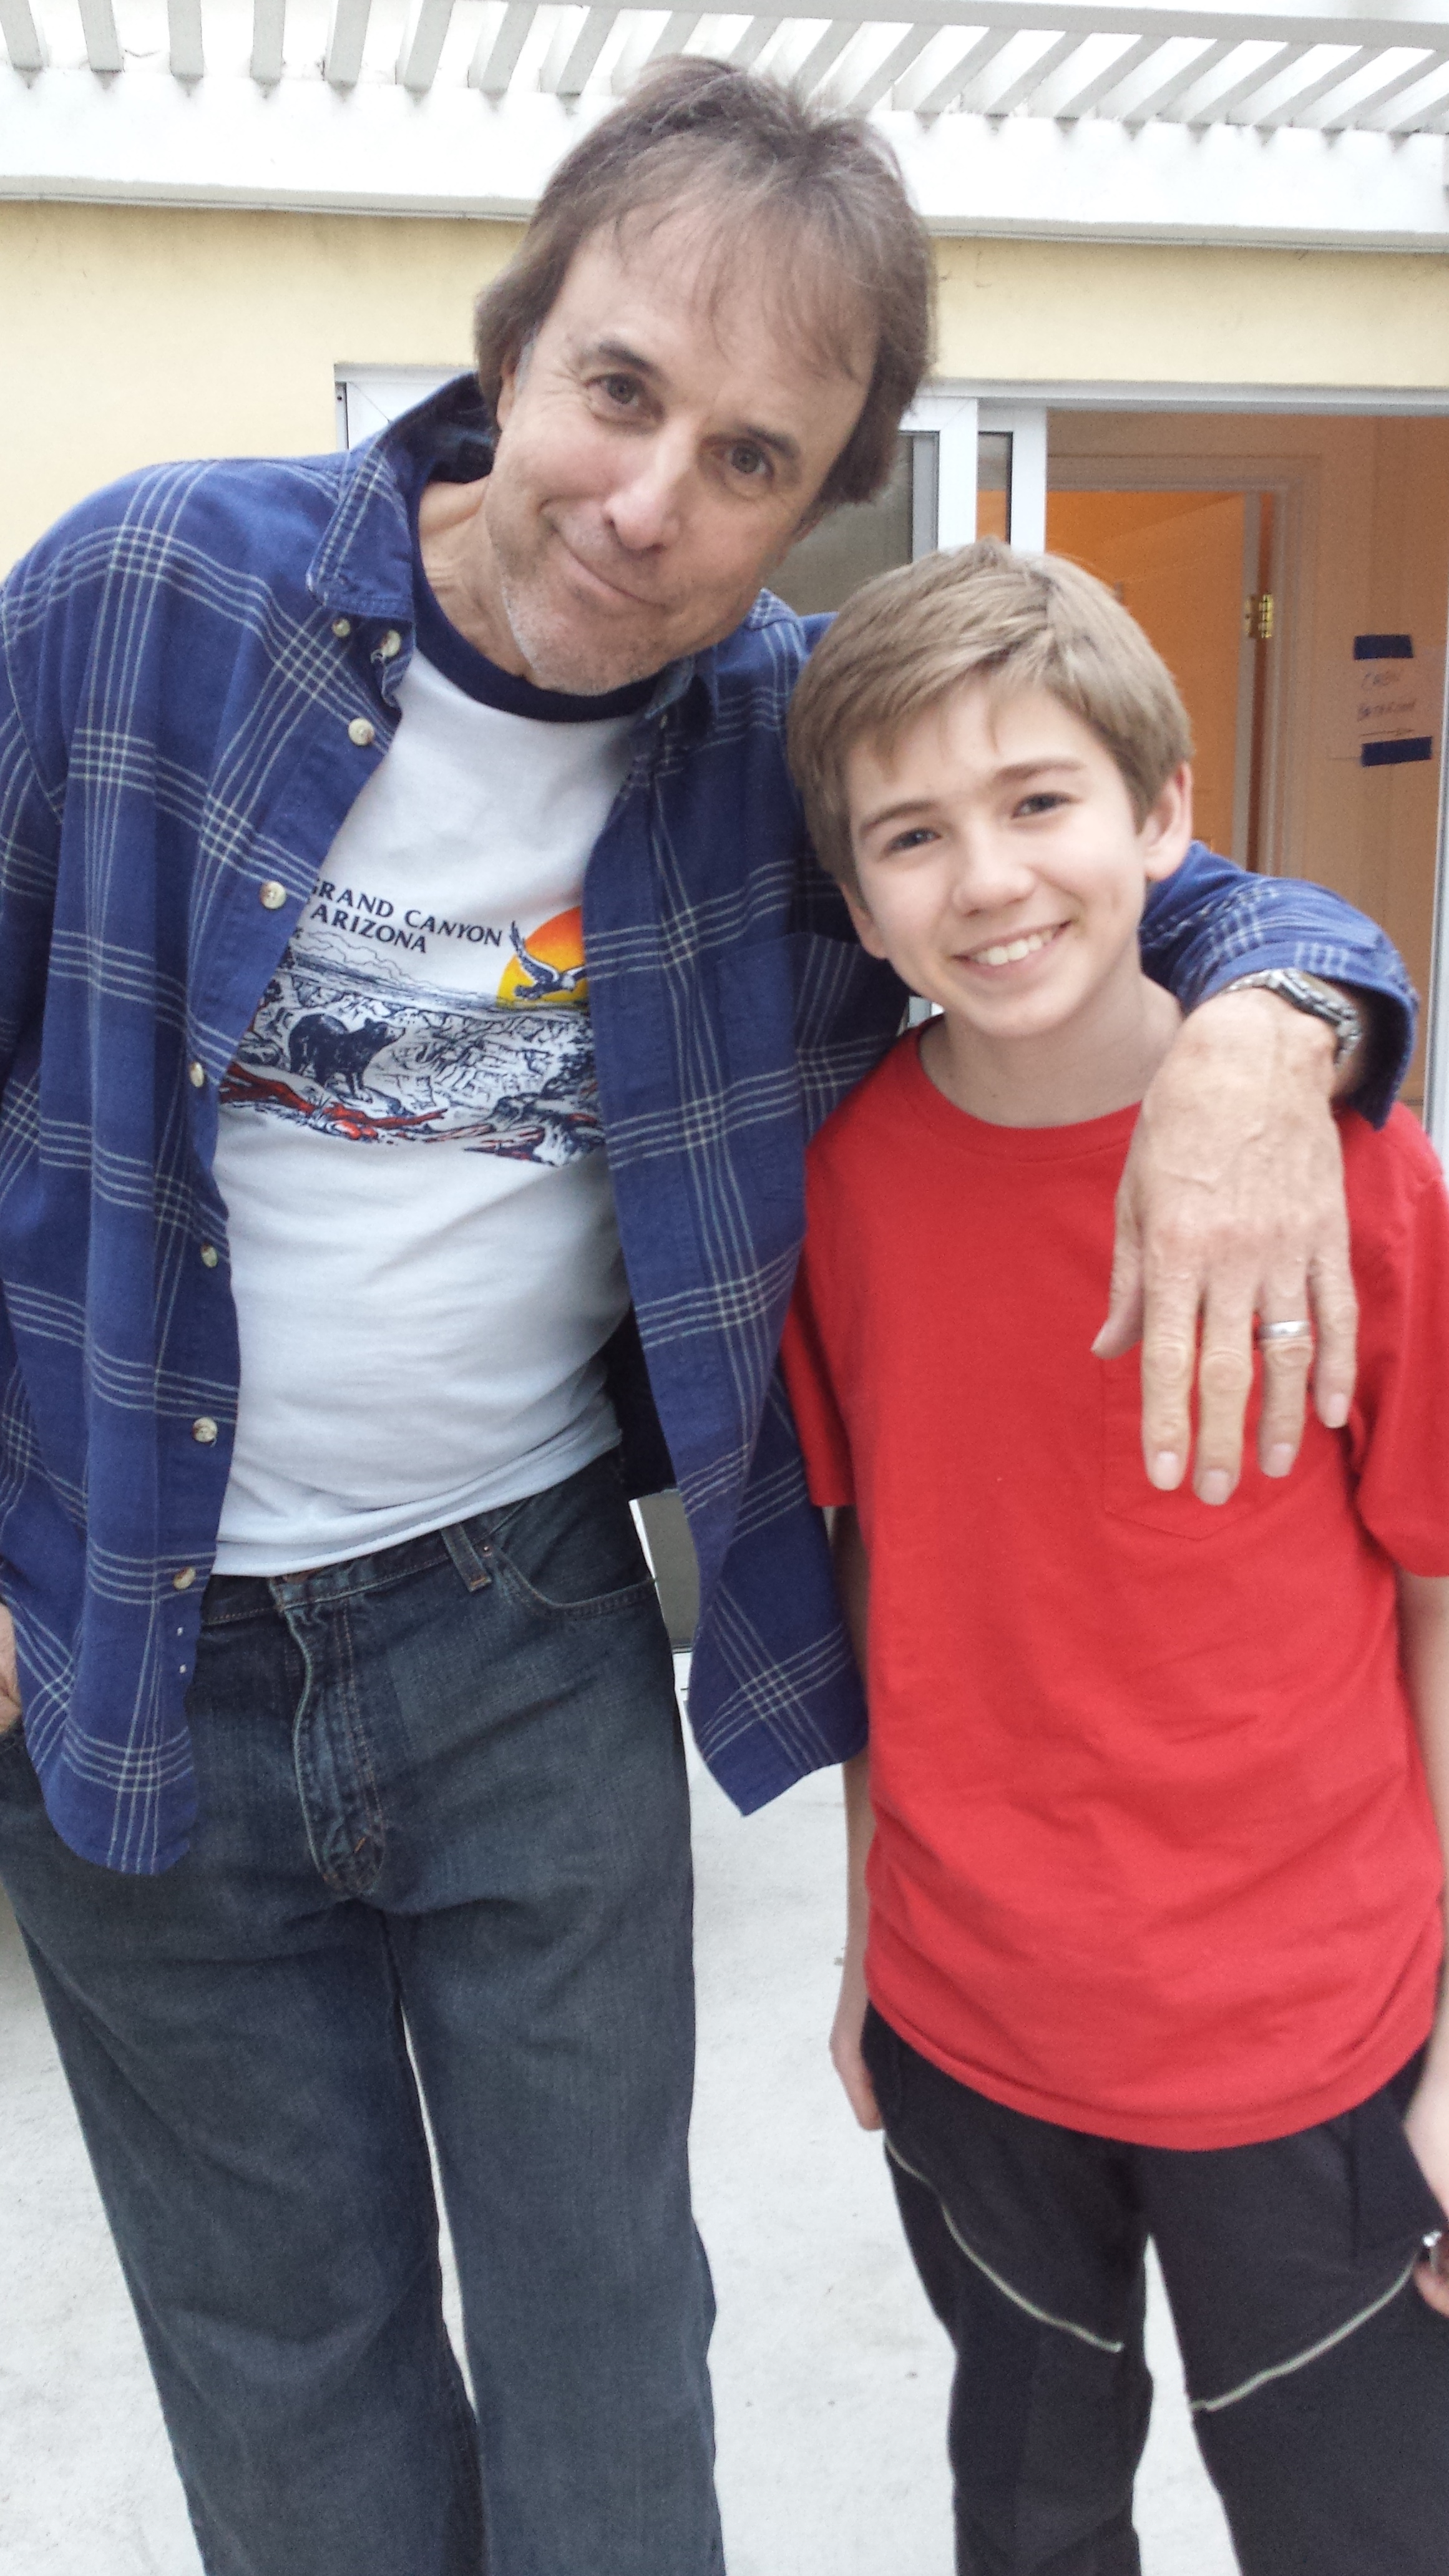 Hanging out with Kevin Nealon on the set of Ghost Dog(2014).